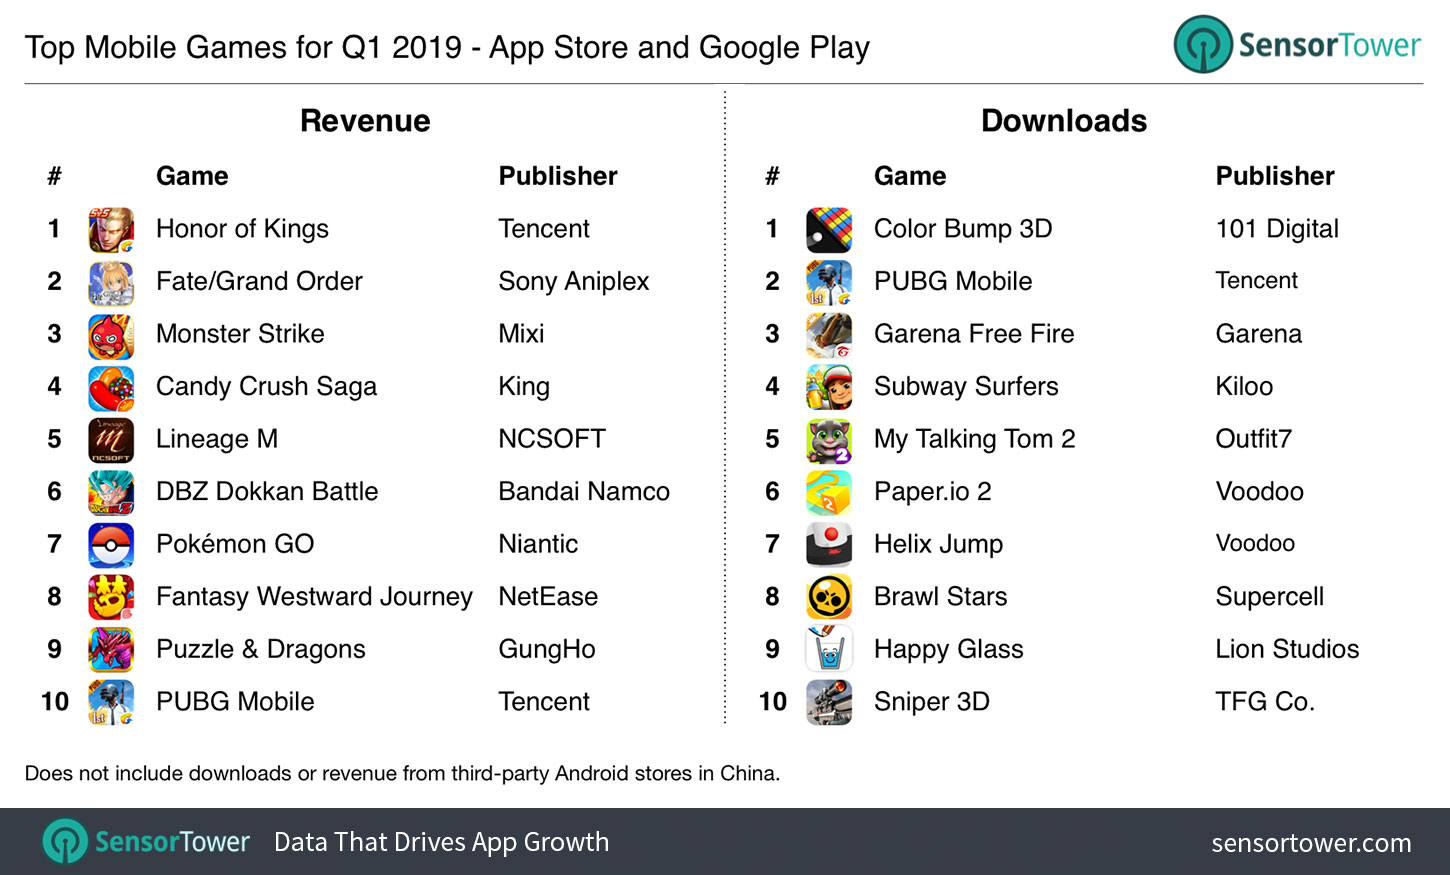 Q1 2019 Top Mobile Games by Revenue and Downloads